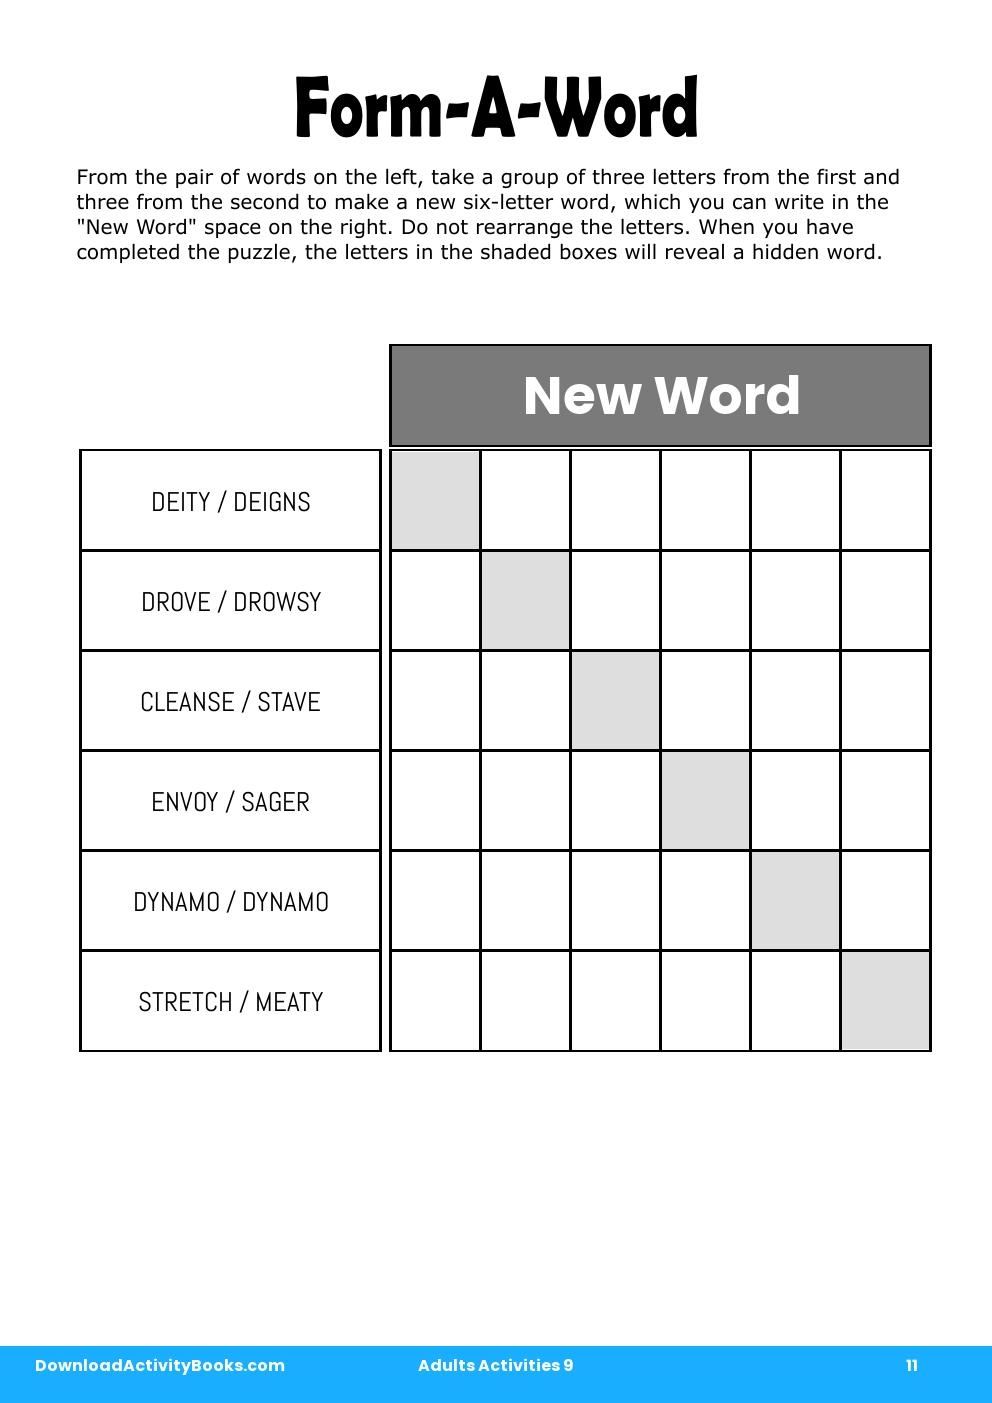 Form-A-Word in Adults Activities 9